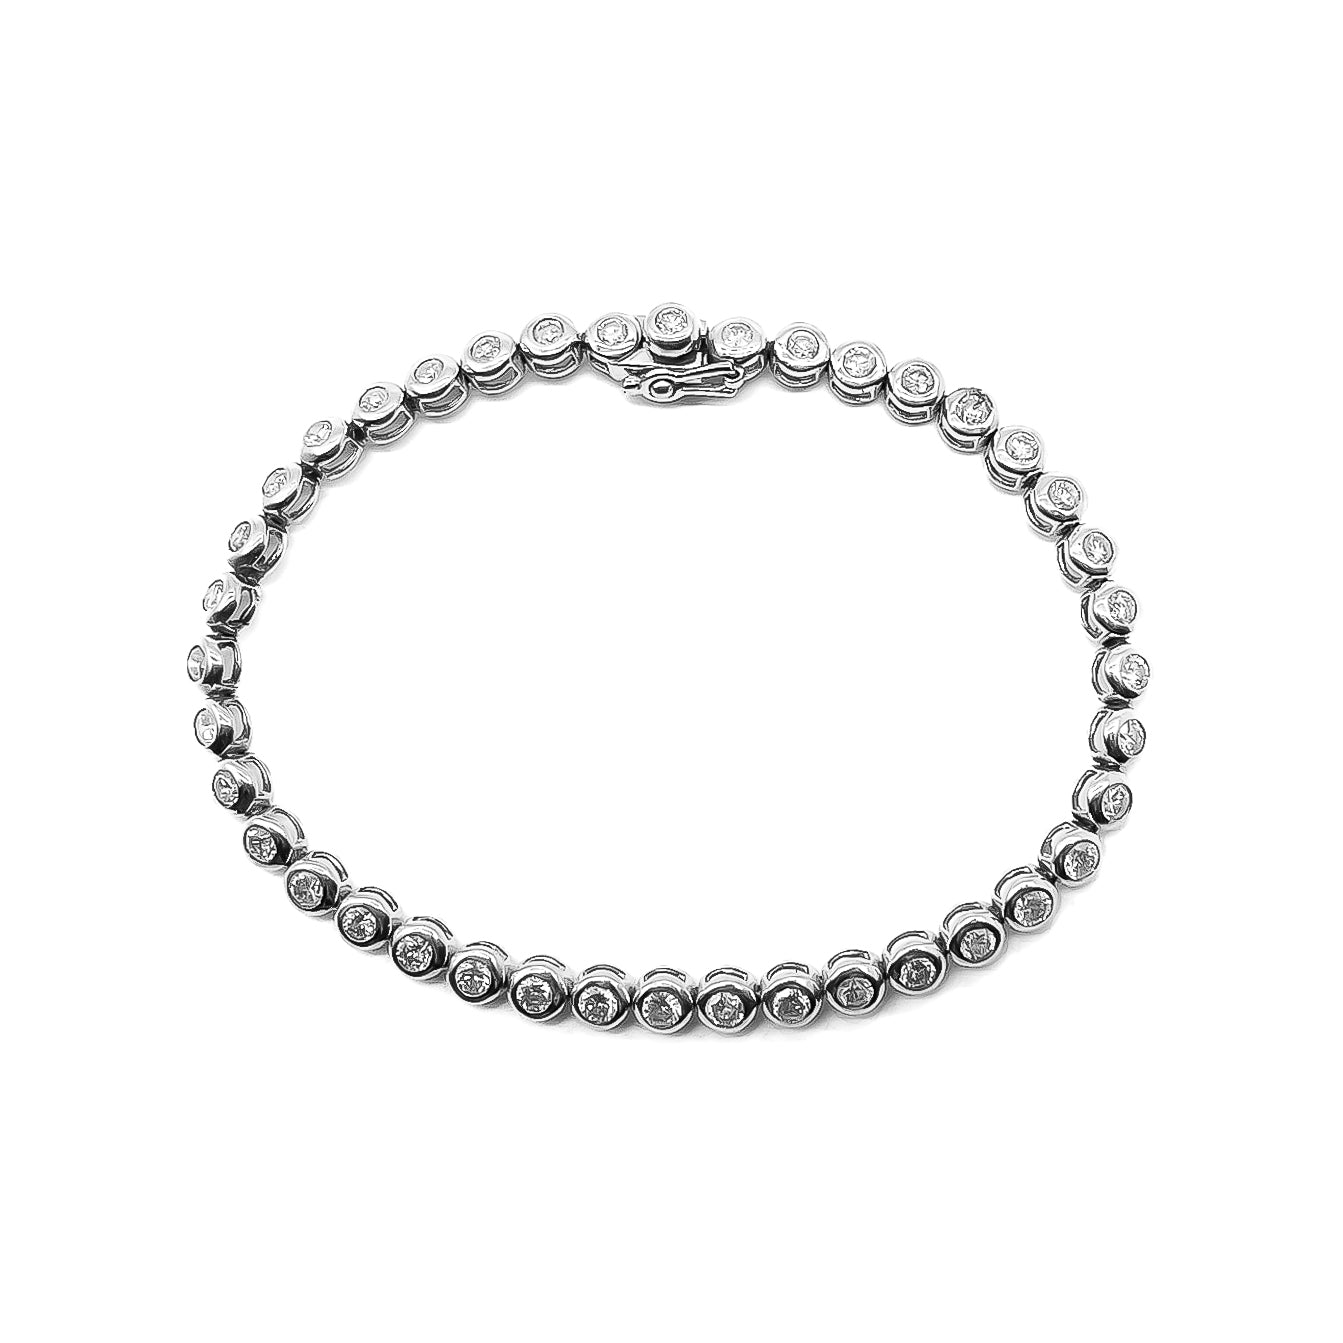 Exquisite tennis bracelet with forty sparkling diamonds, each set in an 18ct white gold tube setting. Bracelet has a safety clasp.